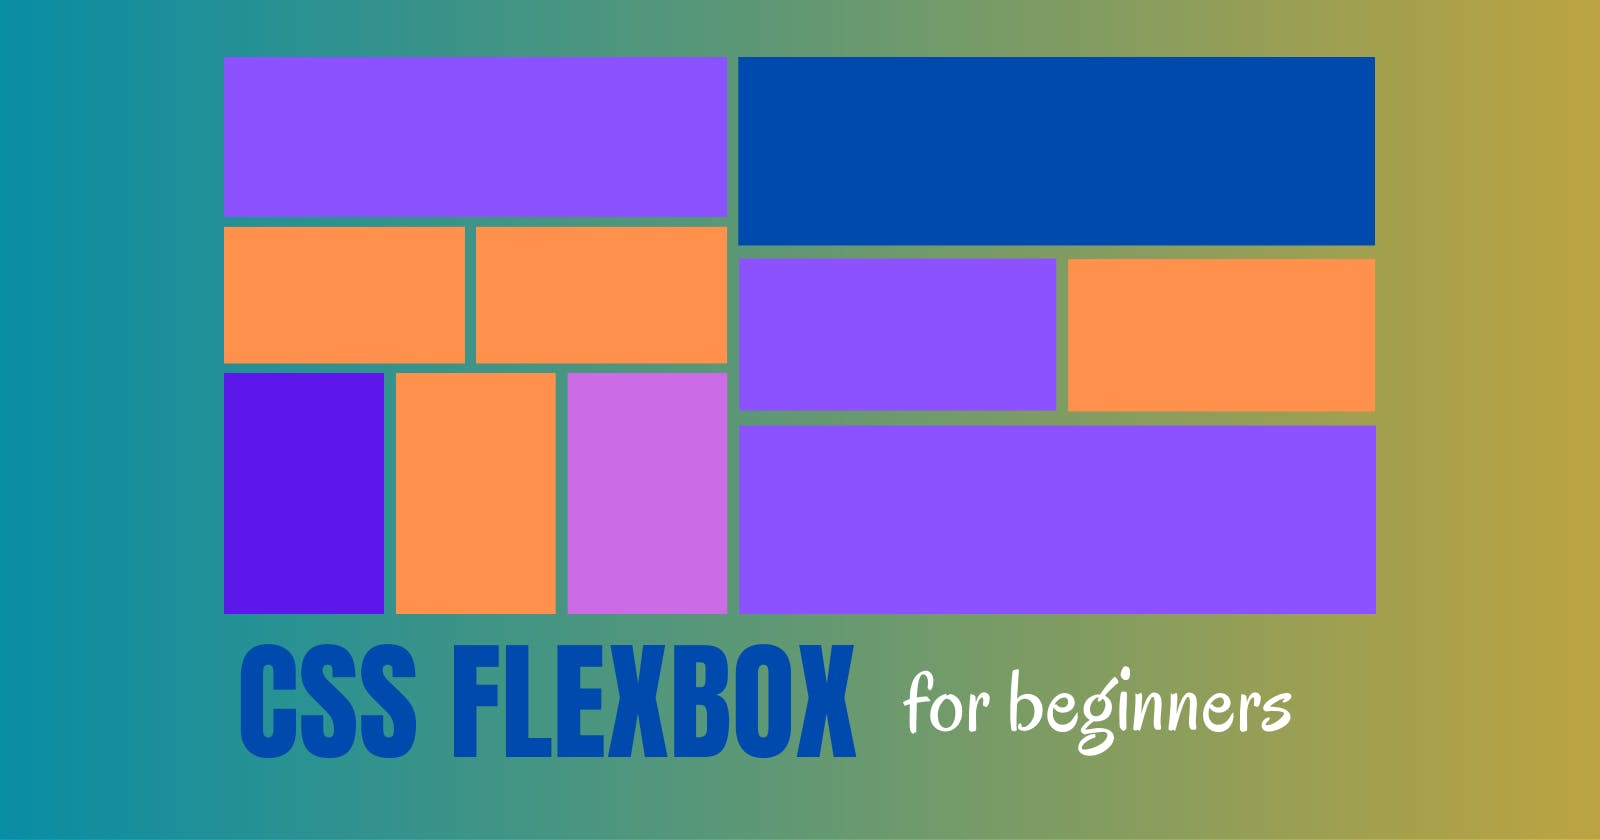 CSS FLEXBOX - the complete beginners guide